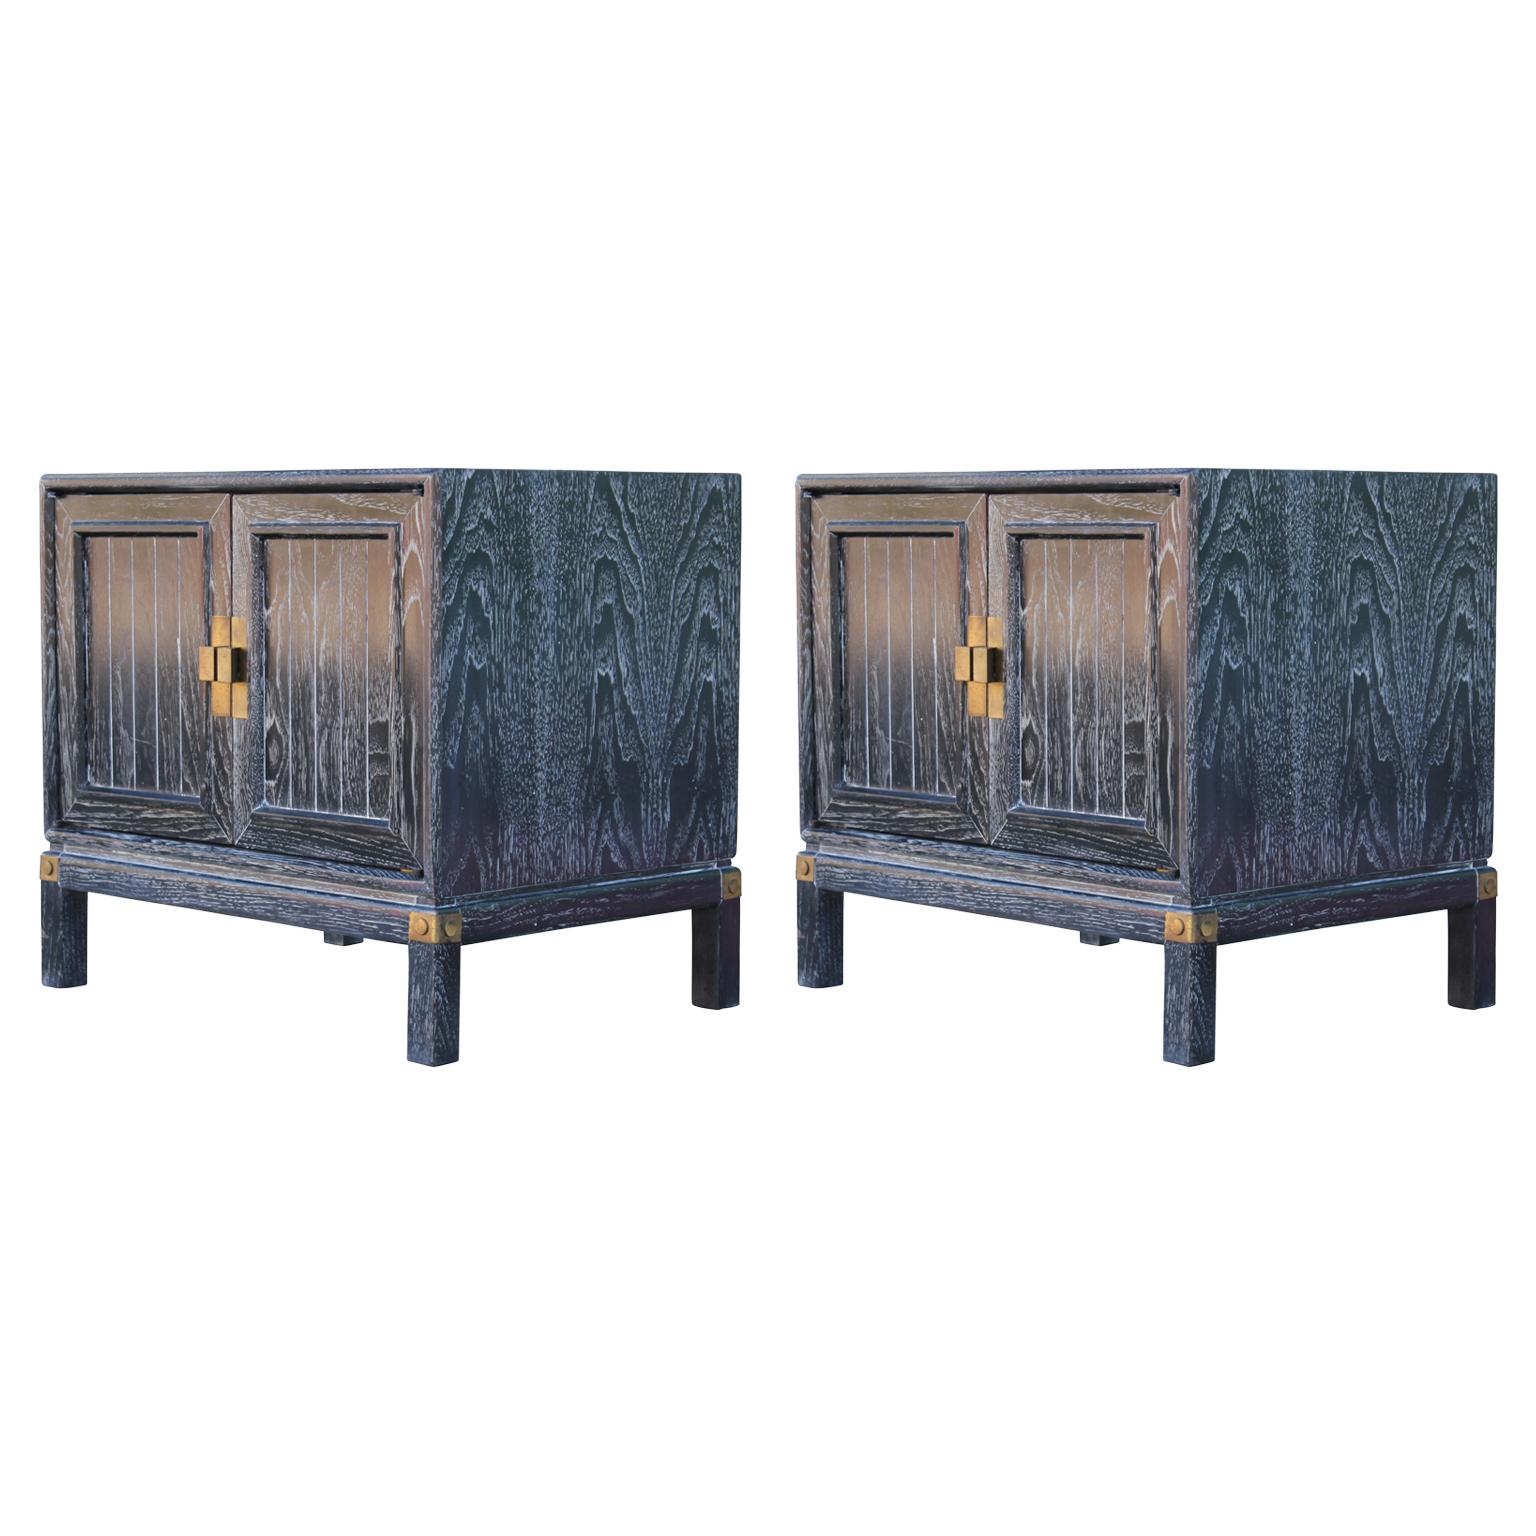 Pair of lovely Hollywood Regency style campaign nightstands that have been freshly refinished with a black and cerused finish with brass hardware. The two cabinet doors open to reveal a single shelf.